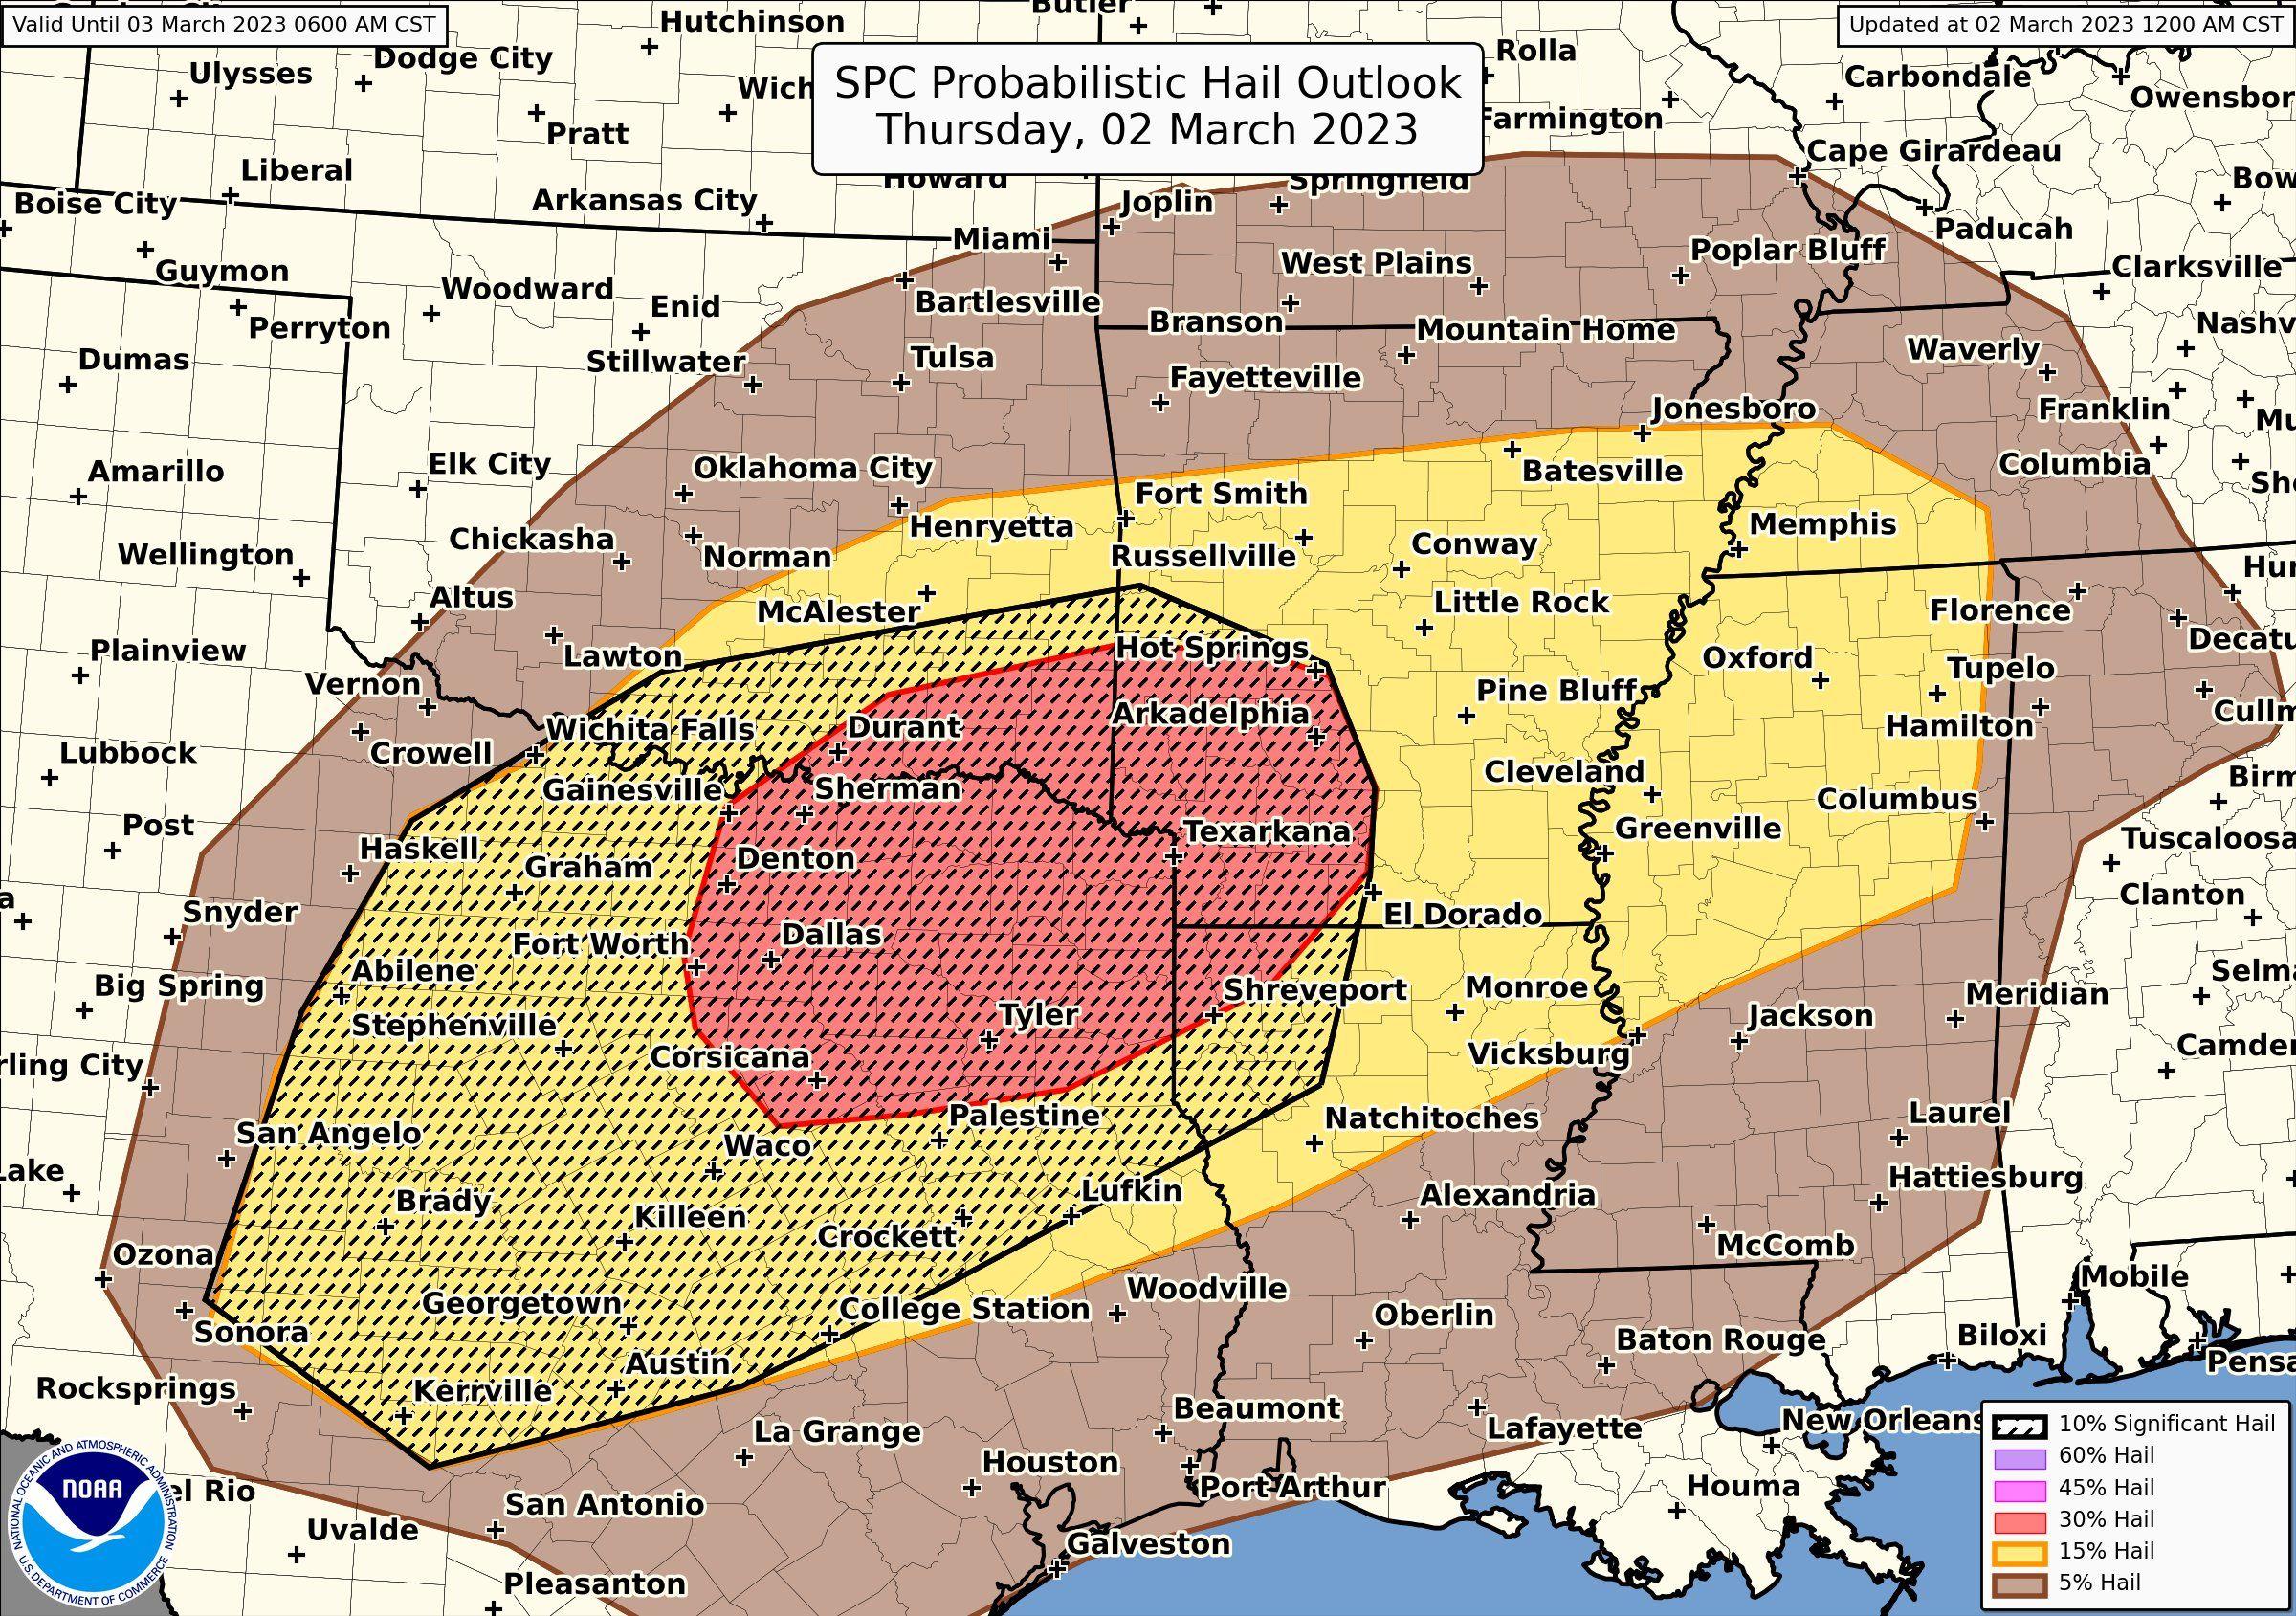 Today's hail outlook